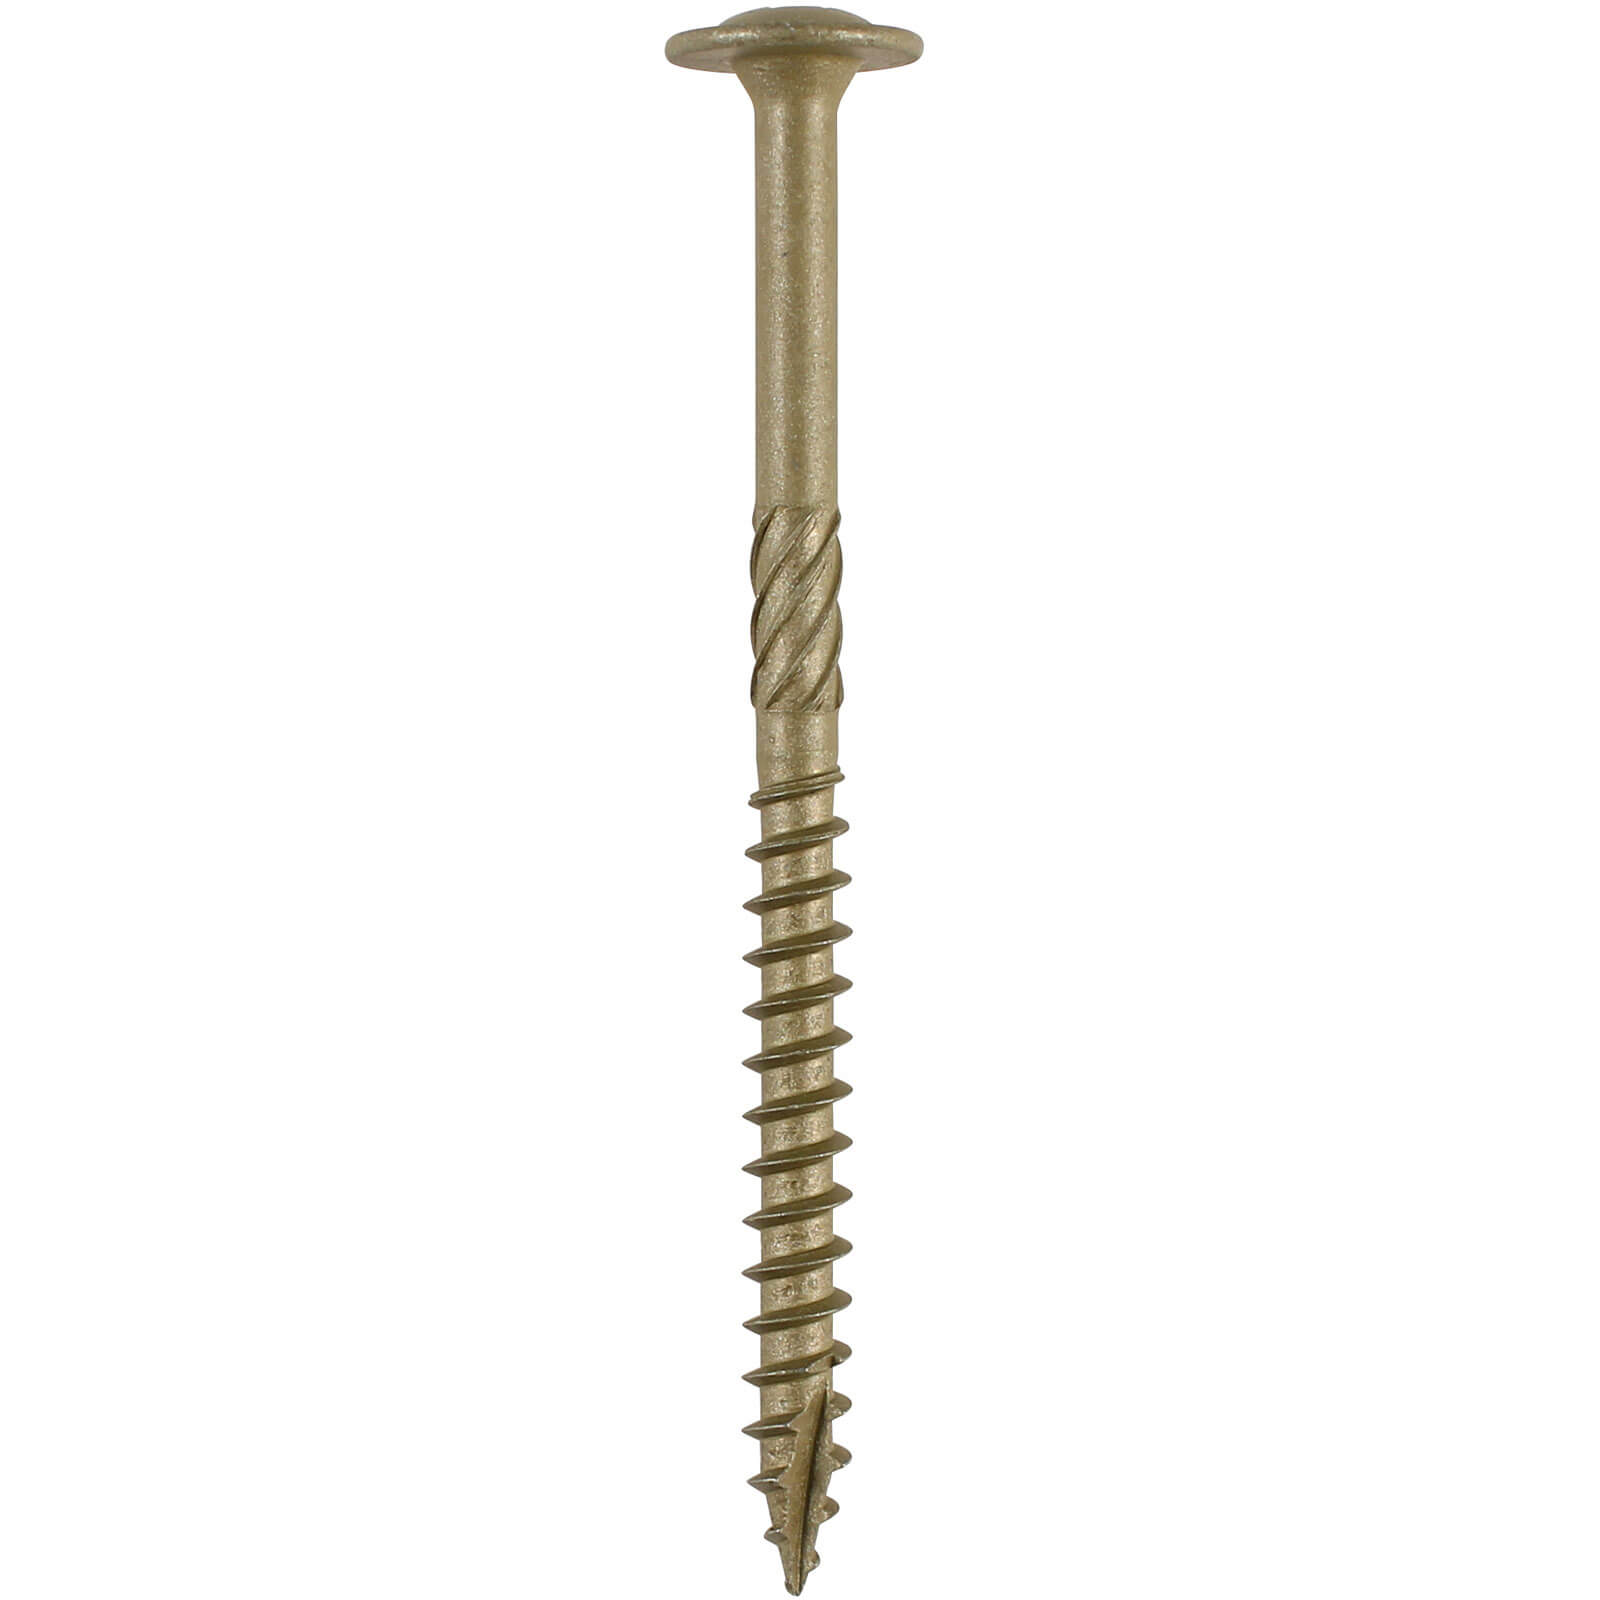 Photos - Nail / Screw / Fastener TIMCO Wafer Torx Head Index Wood Screws 8mm 400mm Pack of 25 400INW 